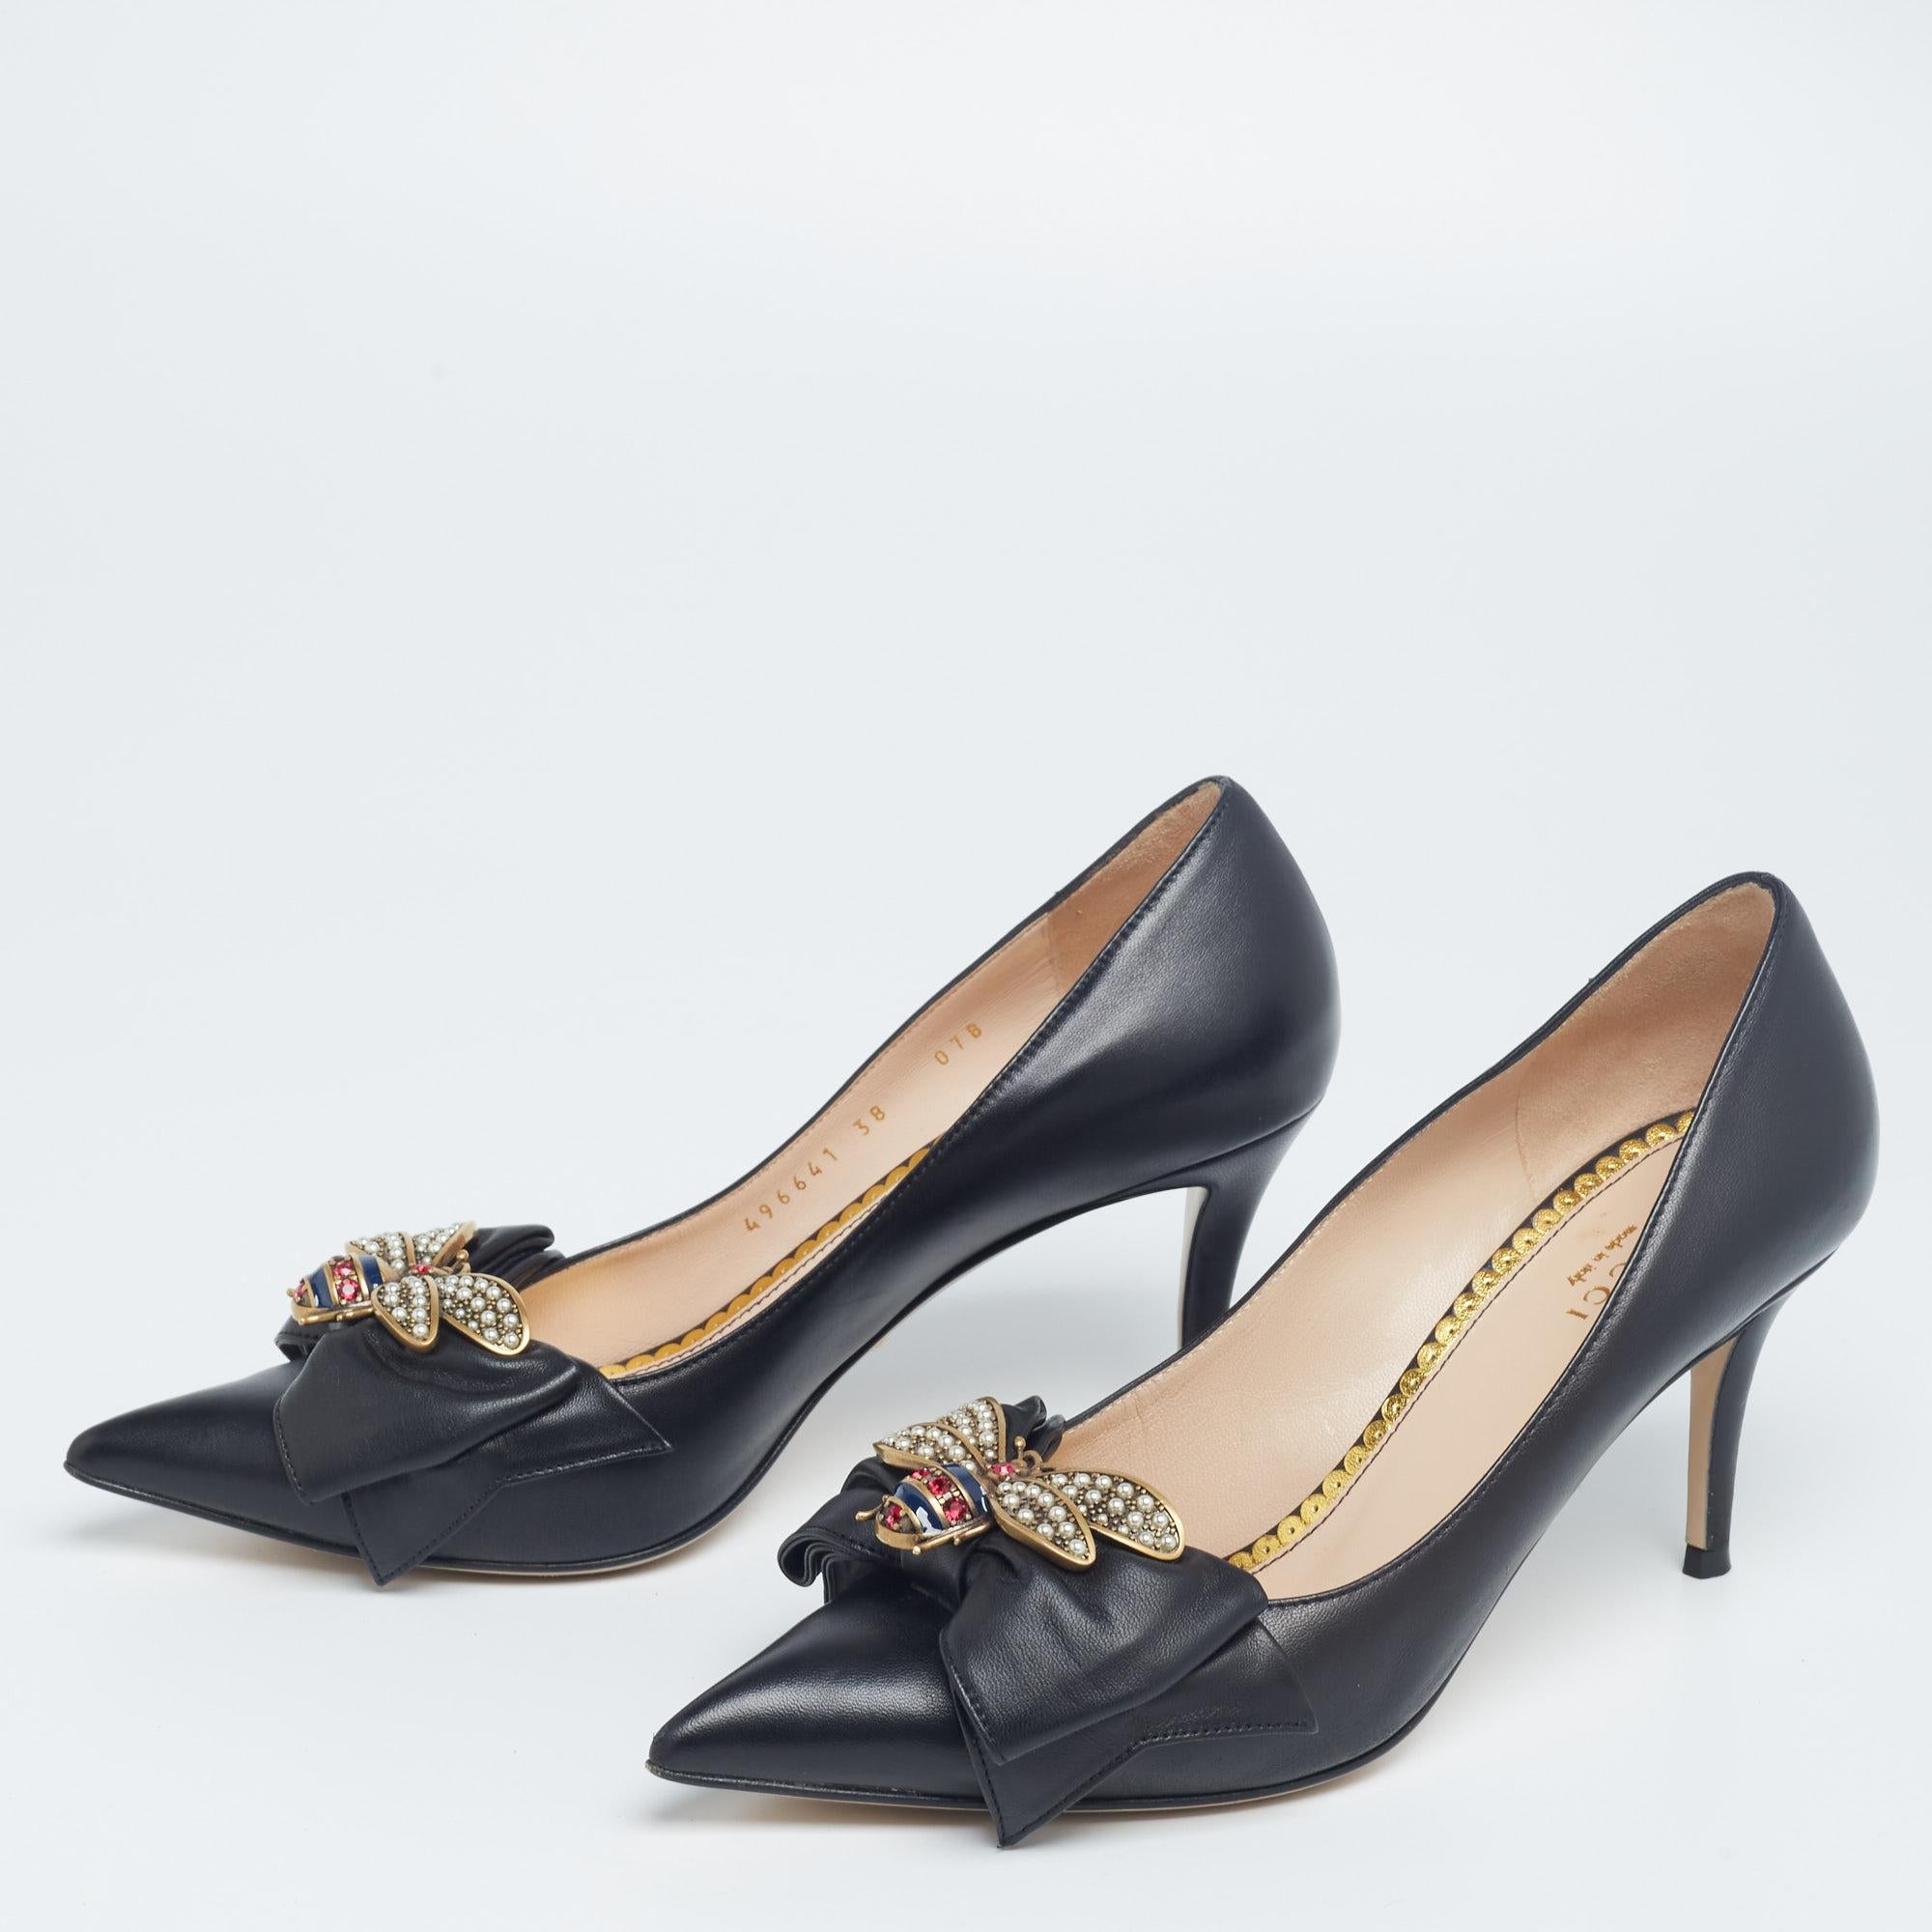 The alluring design and grand hue of these Gucci pumps make the pair a must-have. Crafted skilfully, these pumps are set on a durable base and comfortable heel. Choose this finely-designed pair of pumps to make a luxe fashion statement.

Includes: